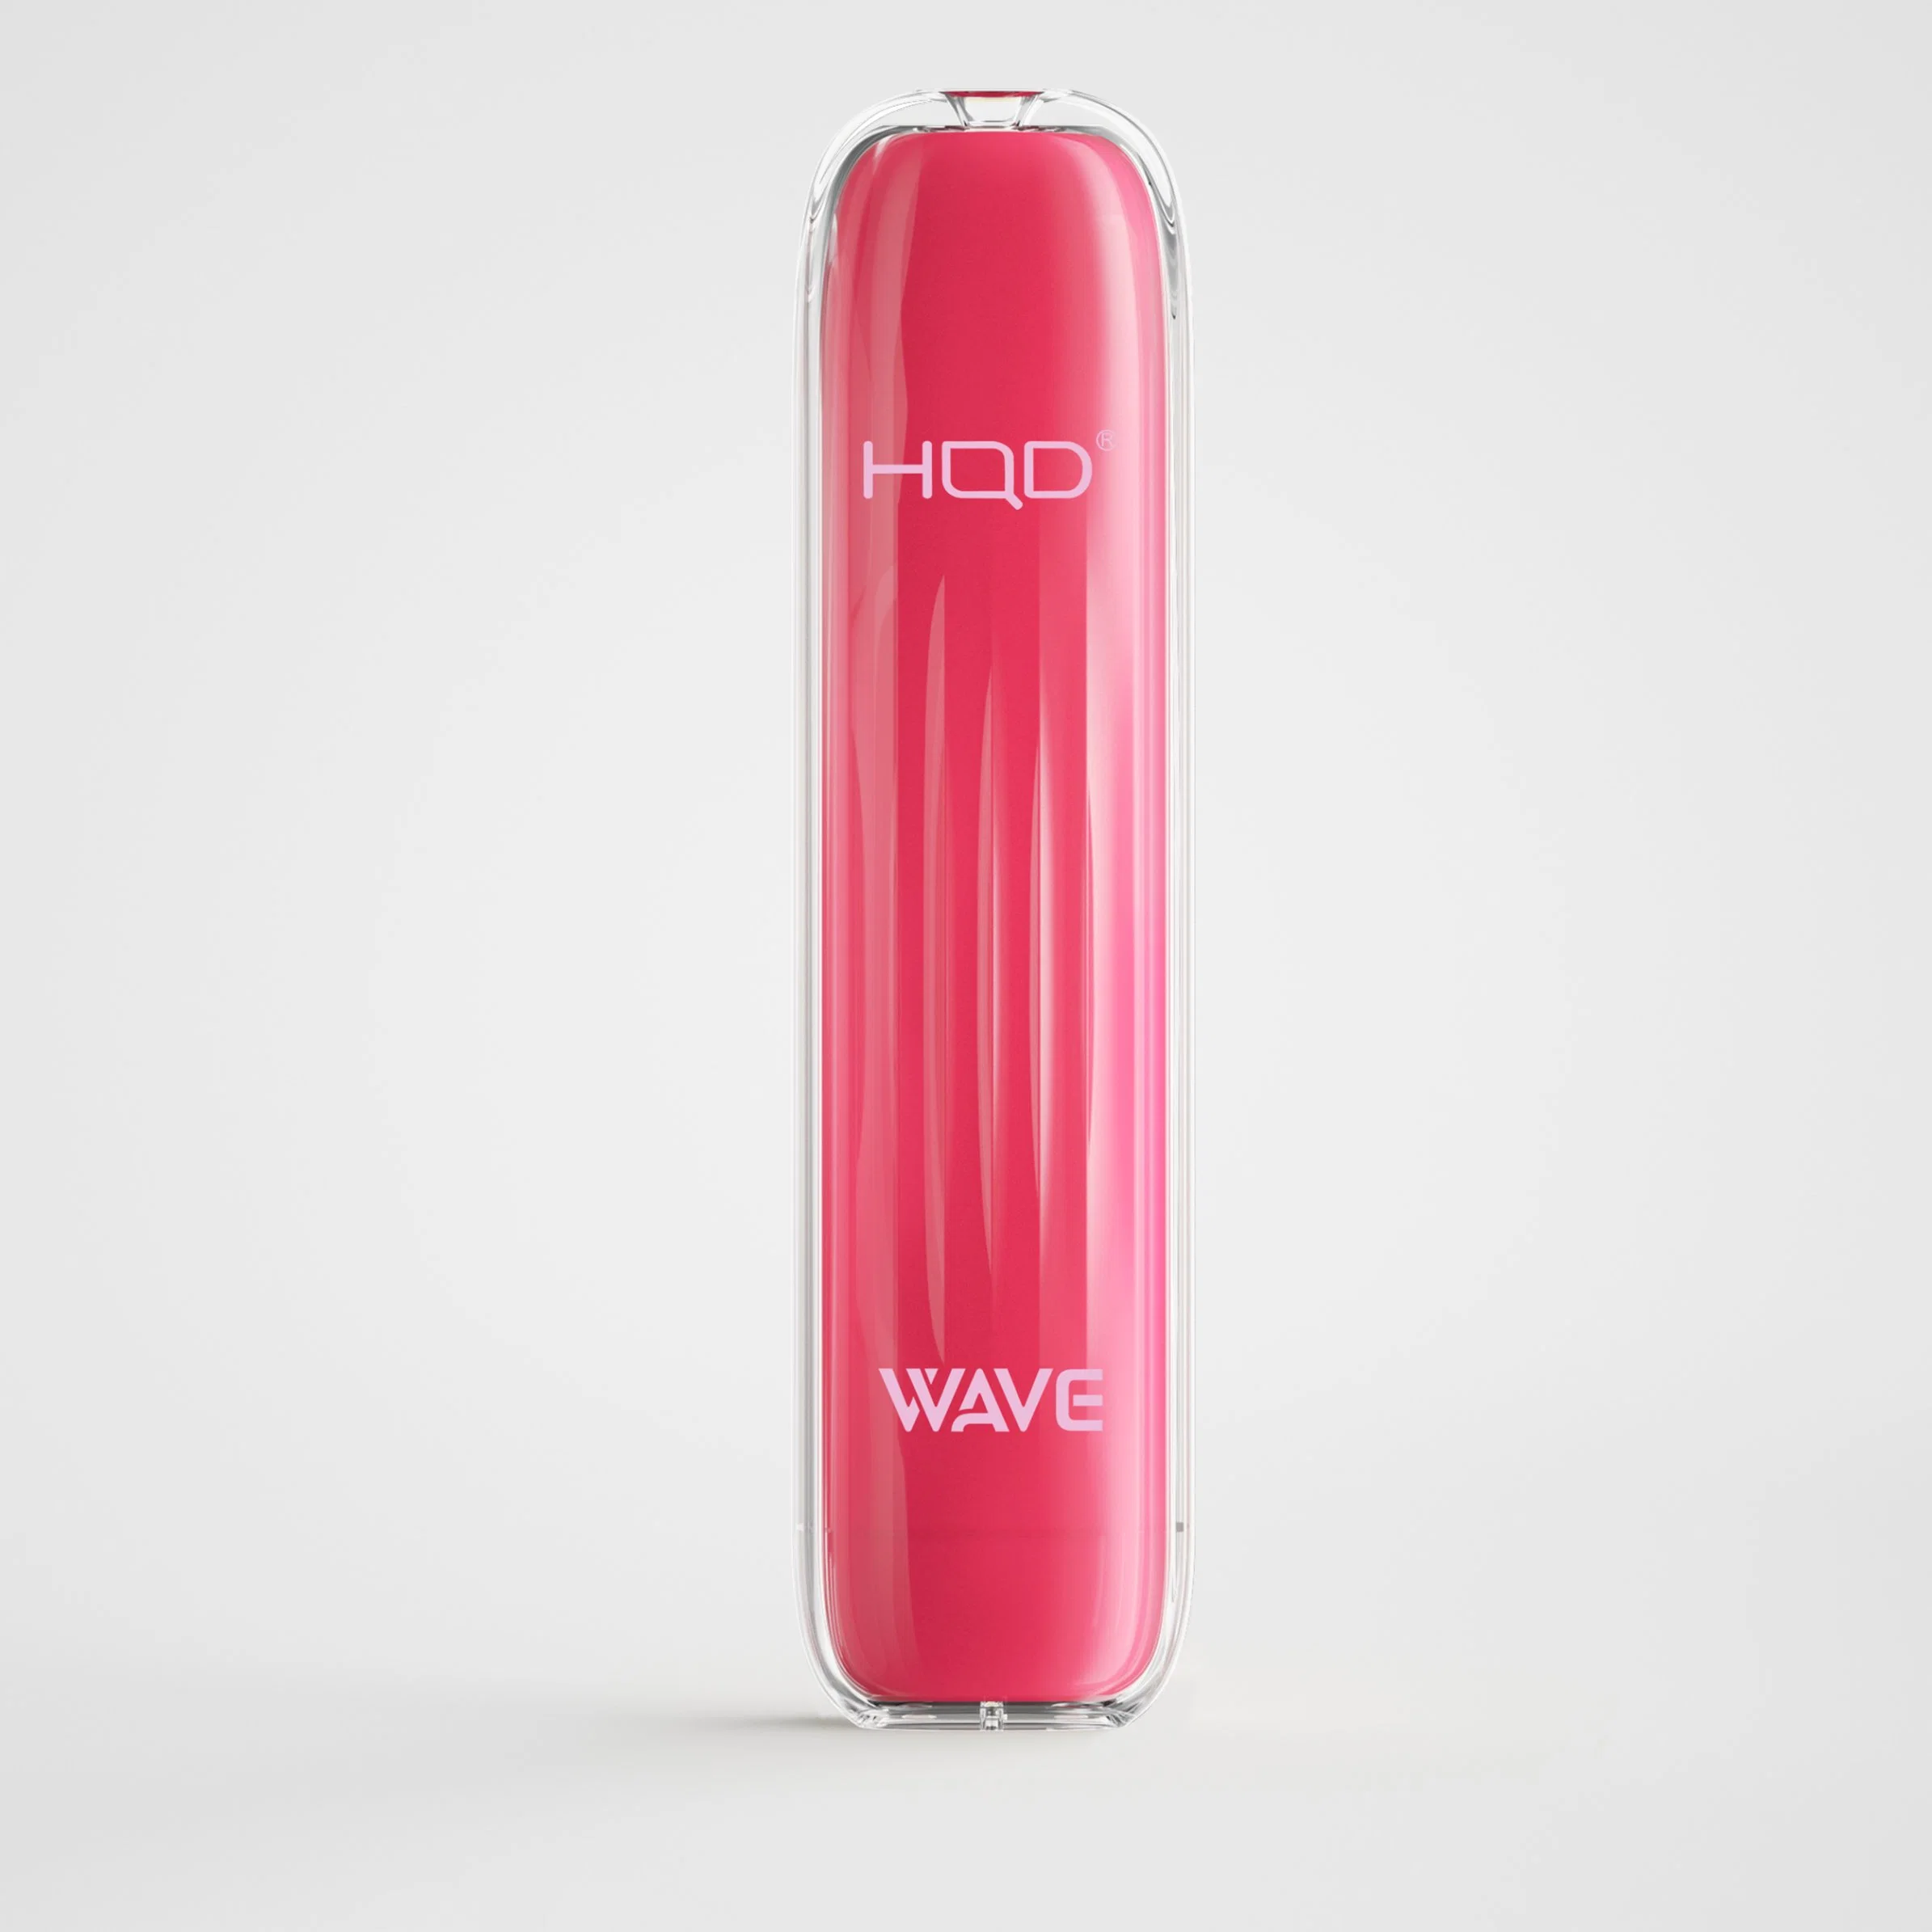 Hqd European Hot Sell 600 Puffs Tpd 500mAh Wave vape Disposable/Chargeable Vape